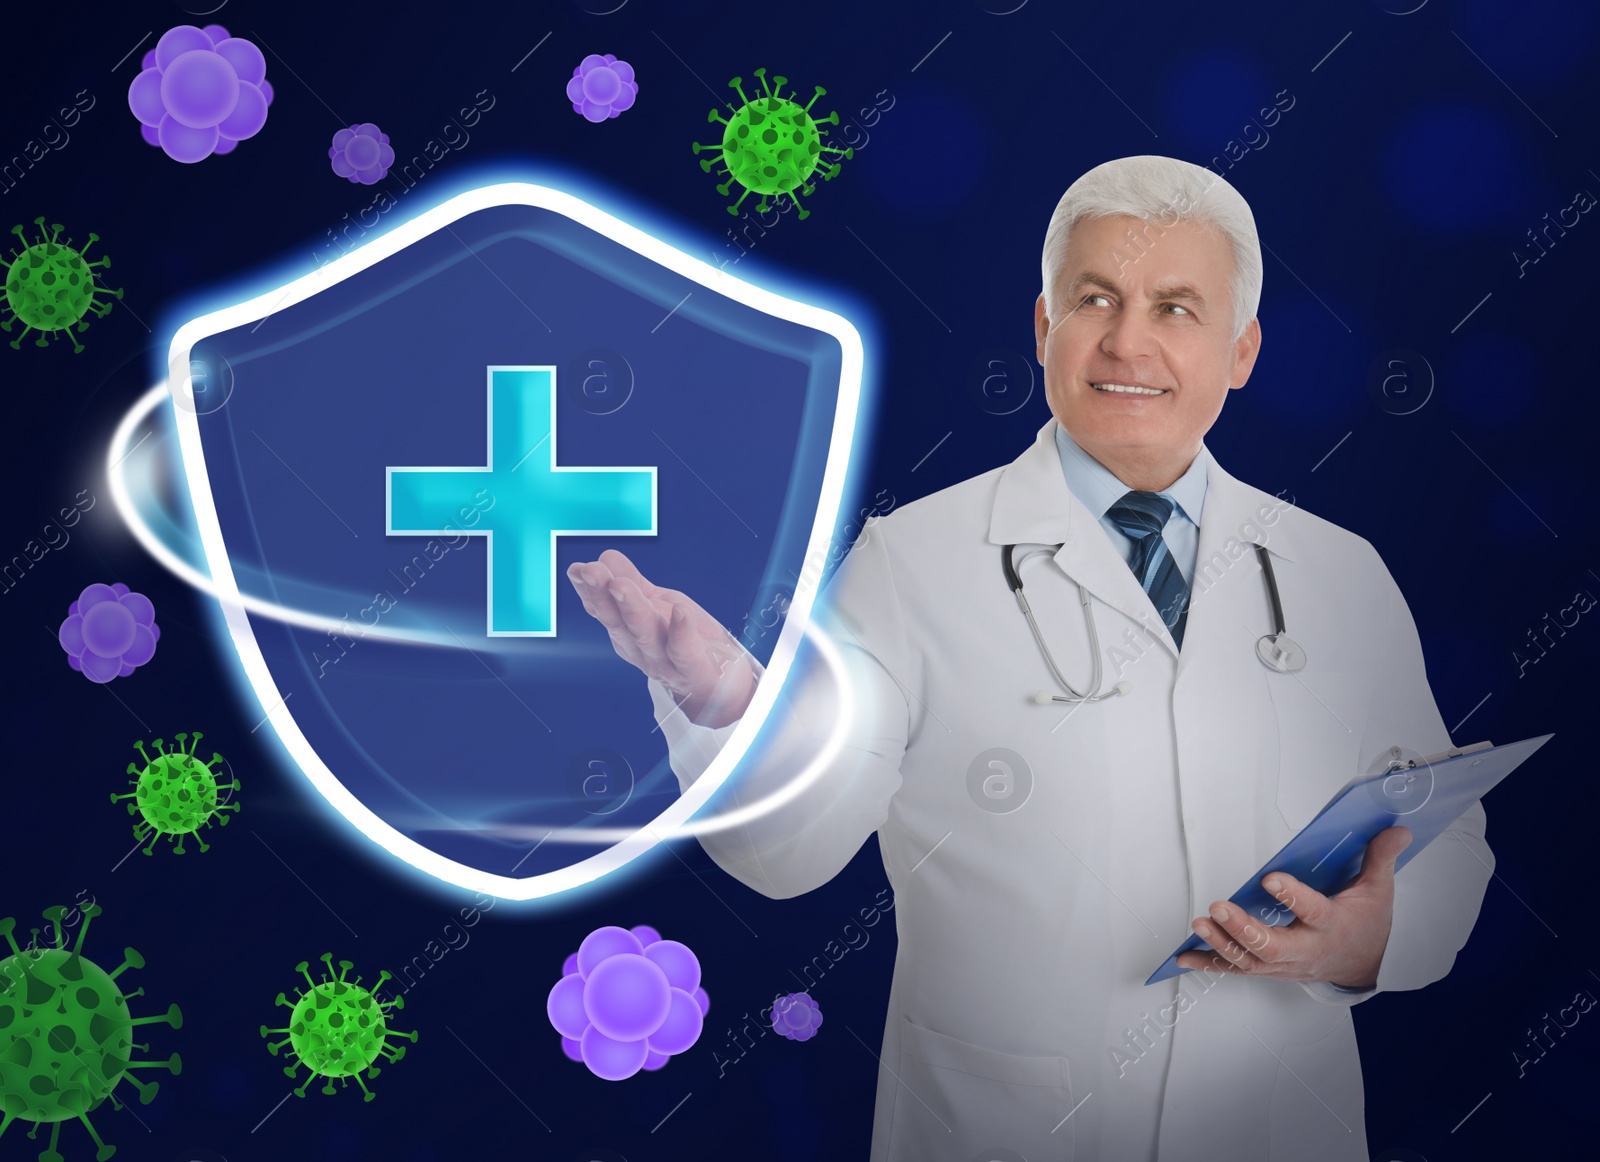 Image of Immunologist and shield with cross as symbol of virus protection on blue background